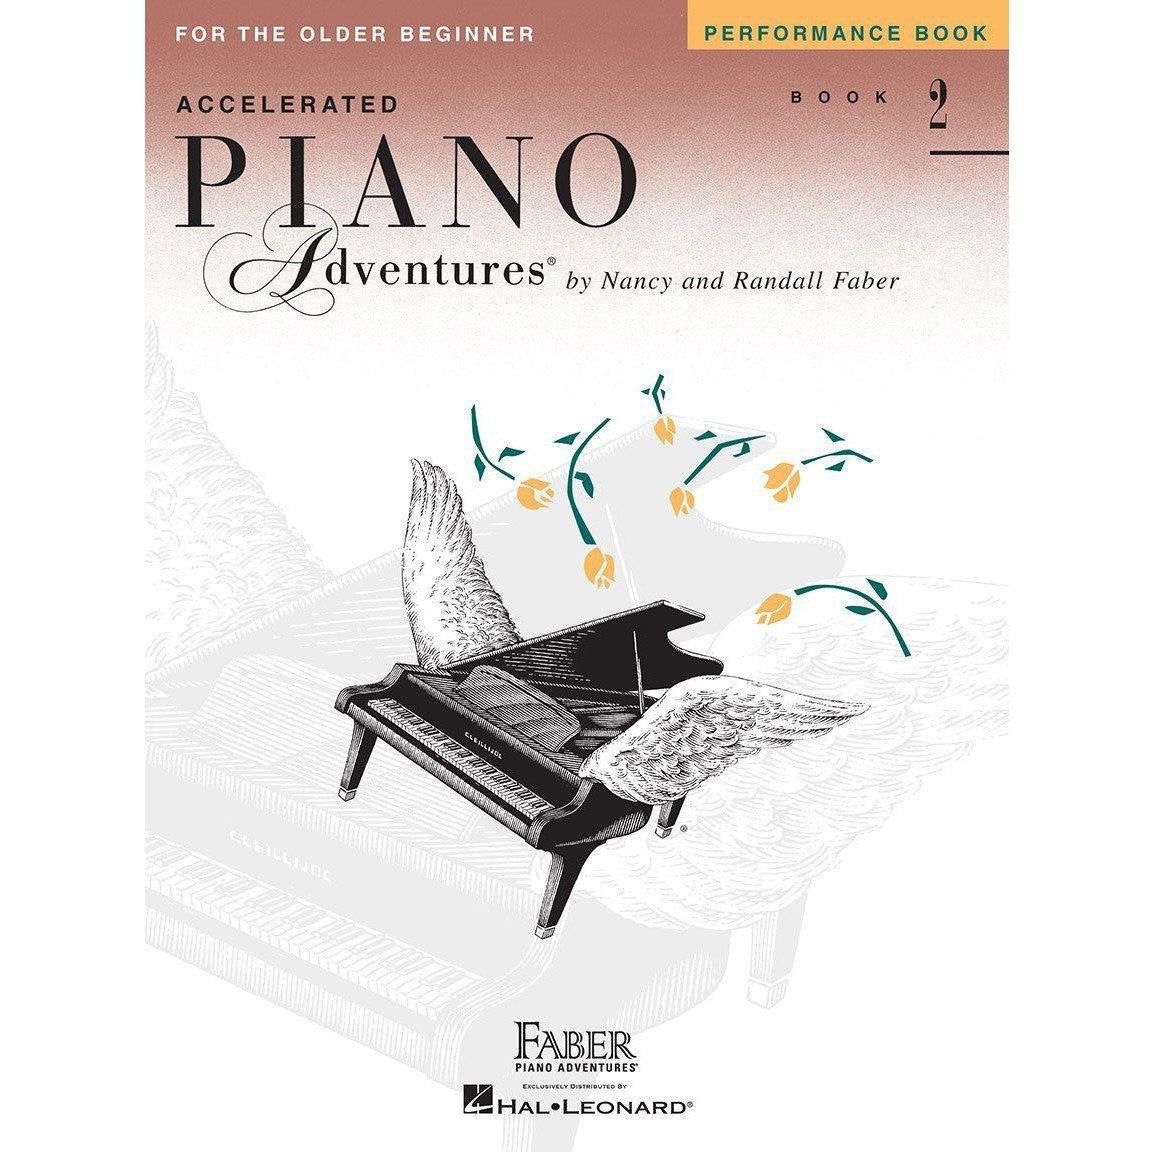 Faber Accelerated Piano Adventures-2-Performance-Andy's Music